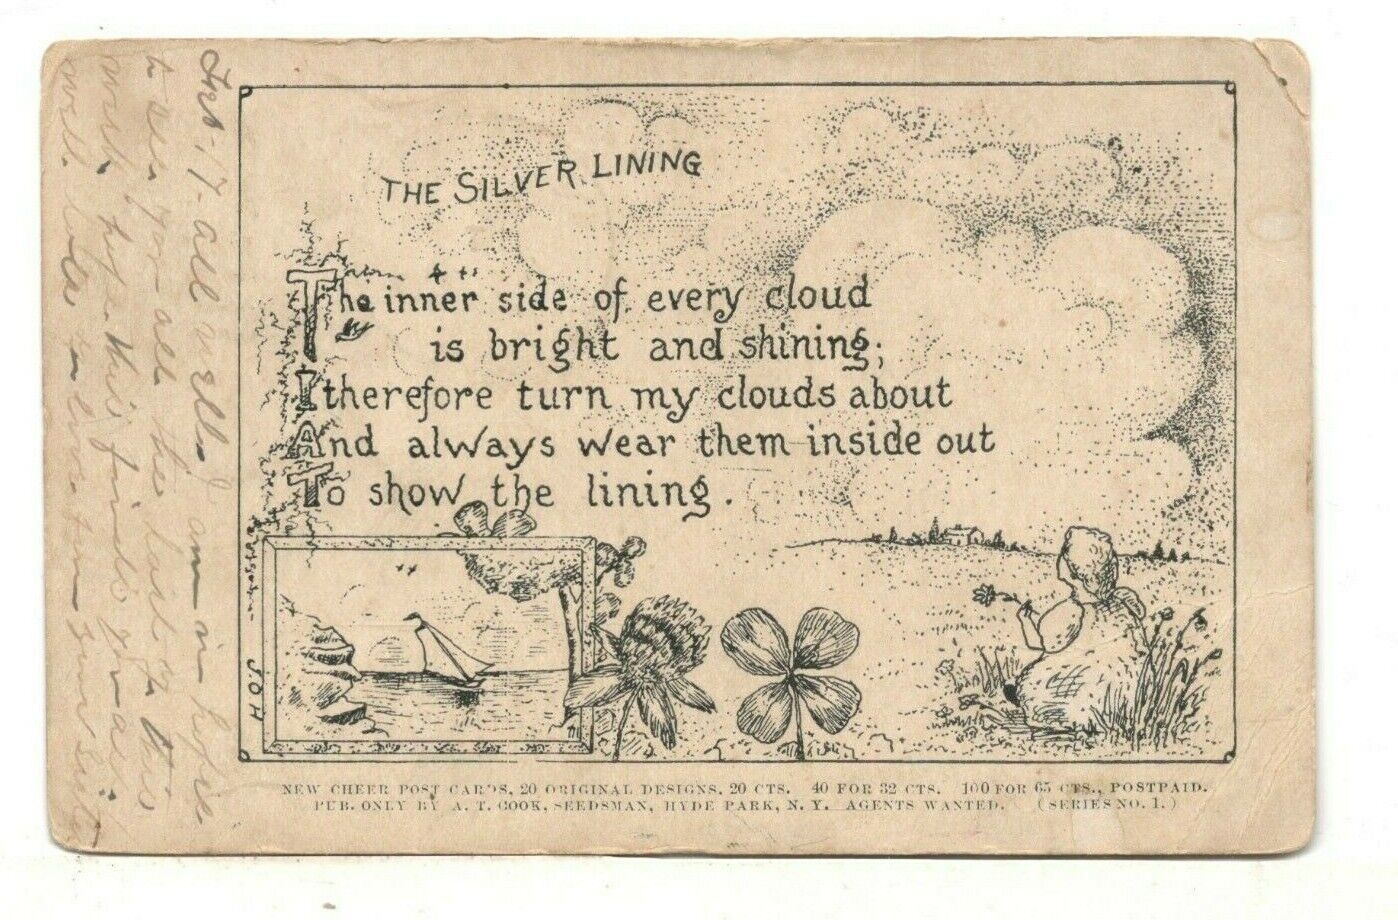 c1905 Greeting PC: “The Silver Lining” - New Cheer Post Cards – A.T. Cook